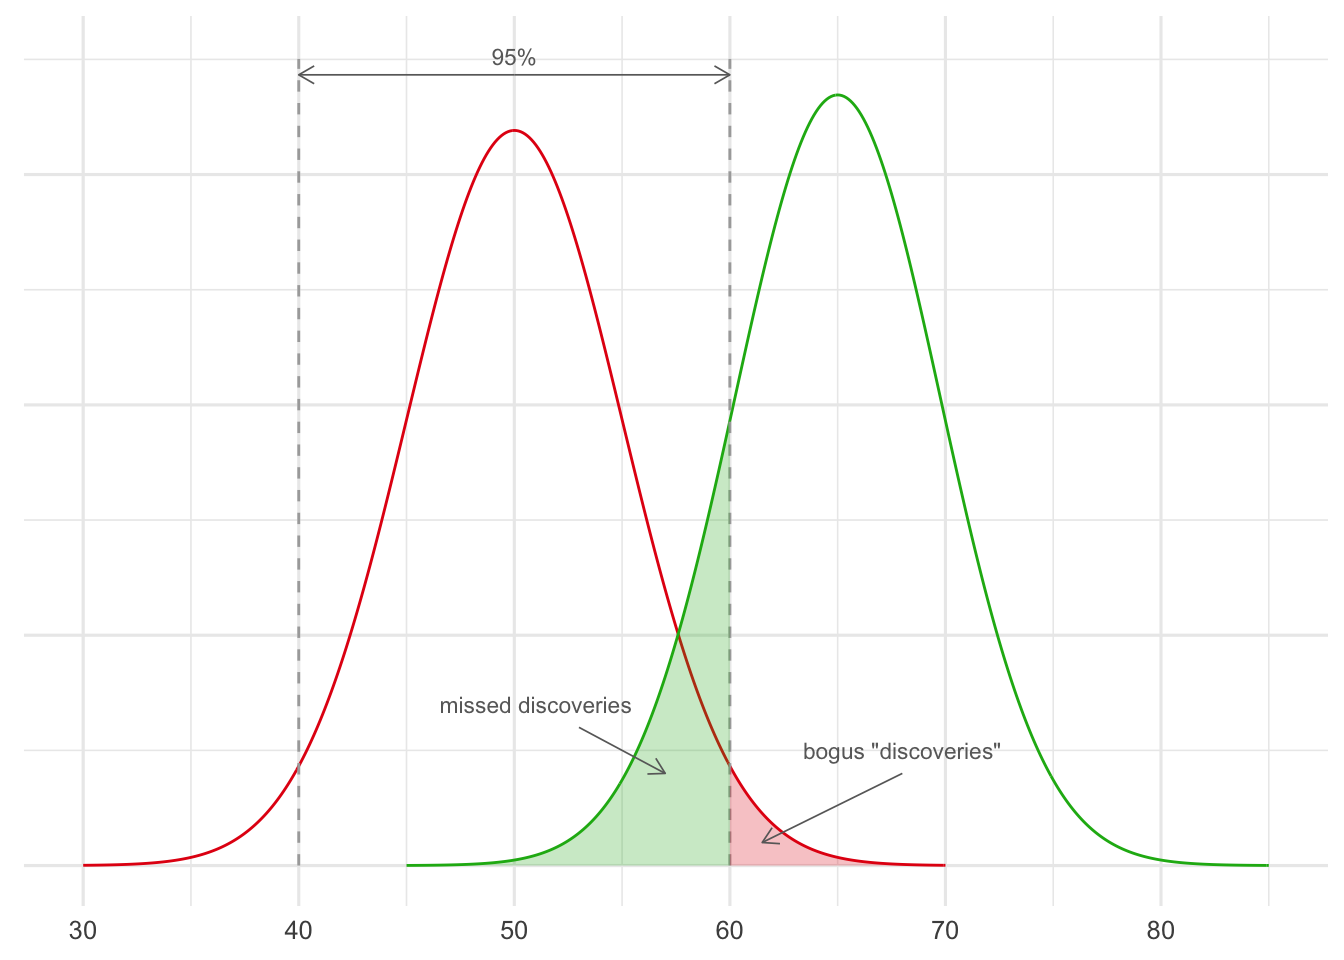 A significance cutoff of $.05$, when running studies with $100$ patients in each. The red curve represents the probable outcomes when studying useless treatments ($50\%$ chance of recovery), the green curve represents the probable outcomes when studying effective treatments ($65\%$ chance of recovery).